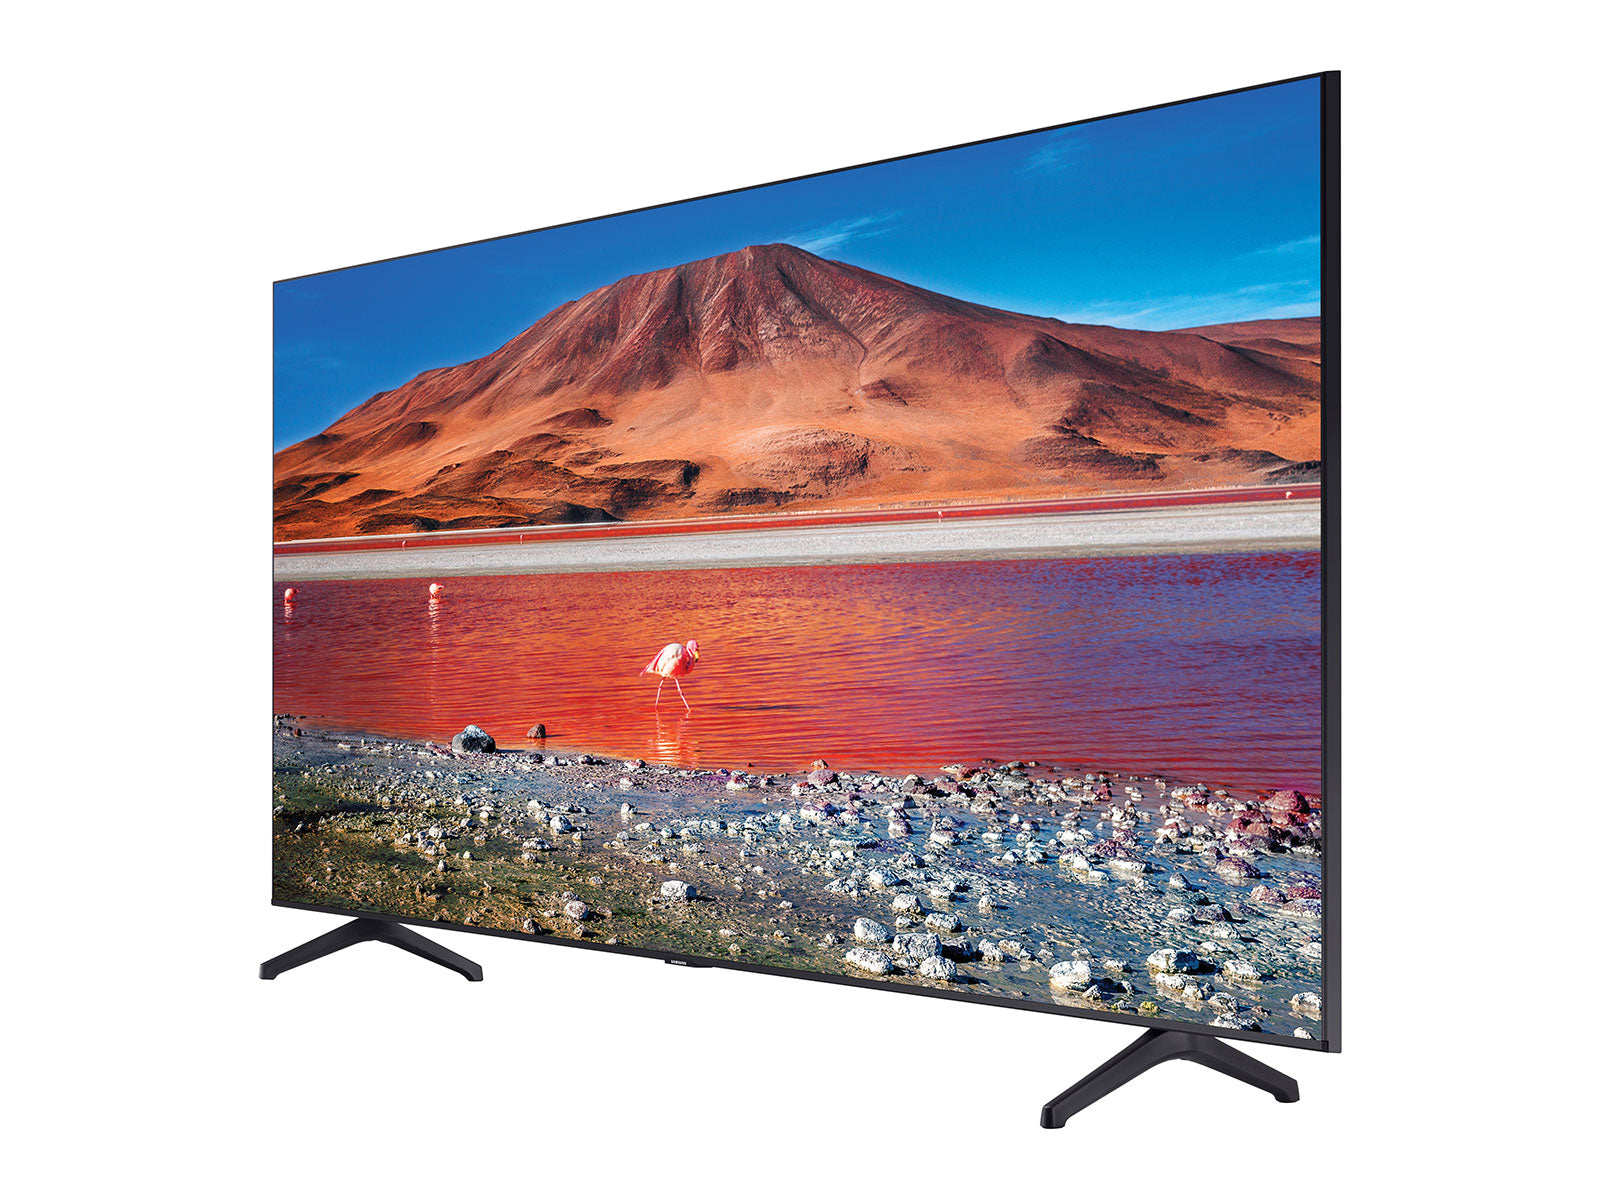 Samsung 65" 4K Crystal UHD HDR Smart TV(Refurbished) Tv's ONLY for delivery in San Diego and Tijuana